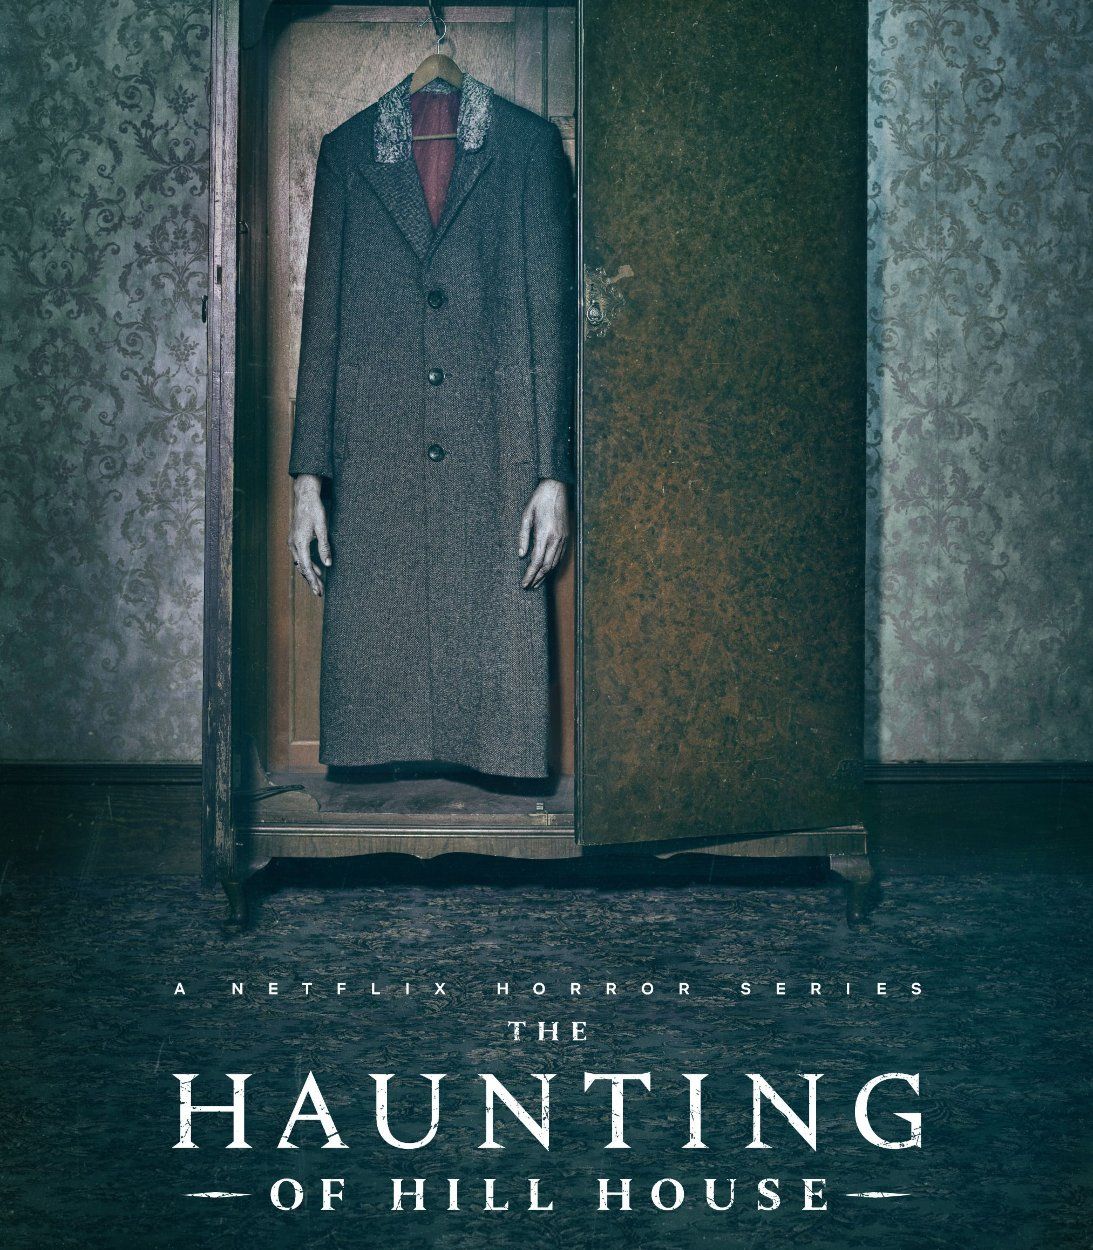 haunting of hill house promo poster TLDR vertical